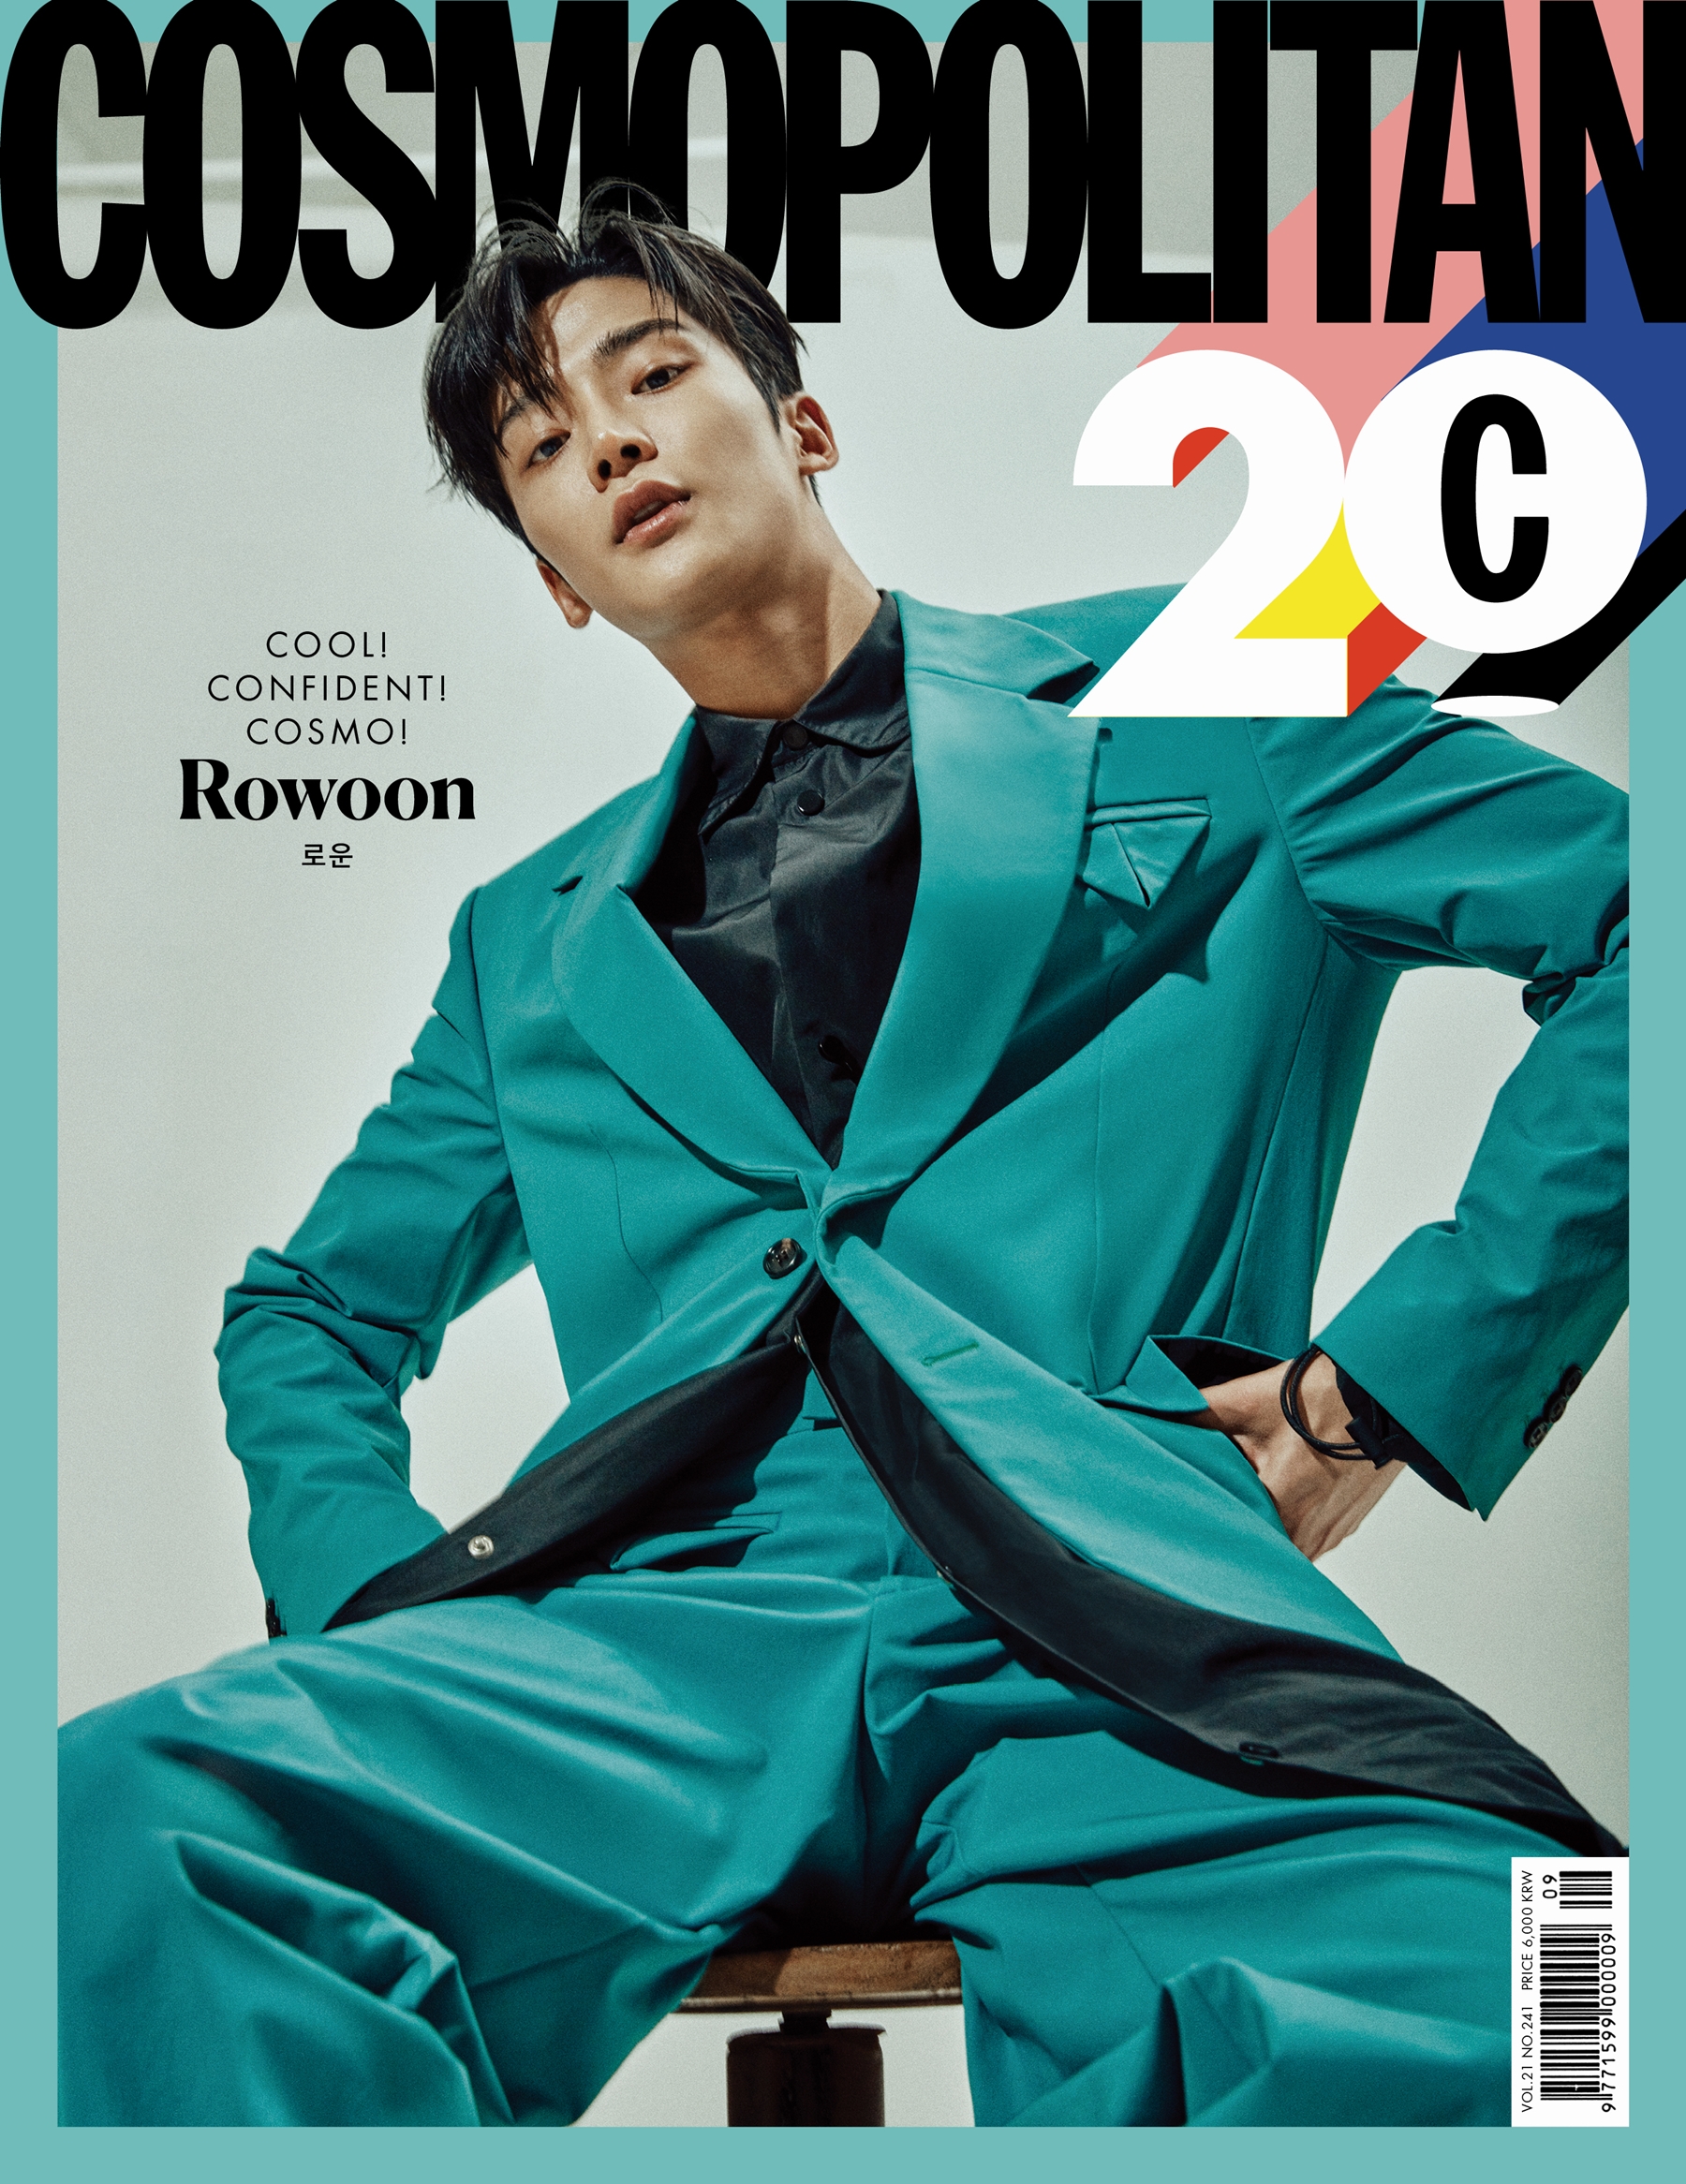 sf9-rowoon-talks-about-fans-love-in-new-pictorial-for-cosmopolitan-3